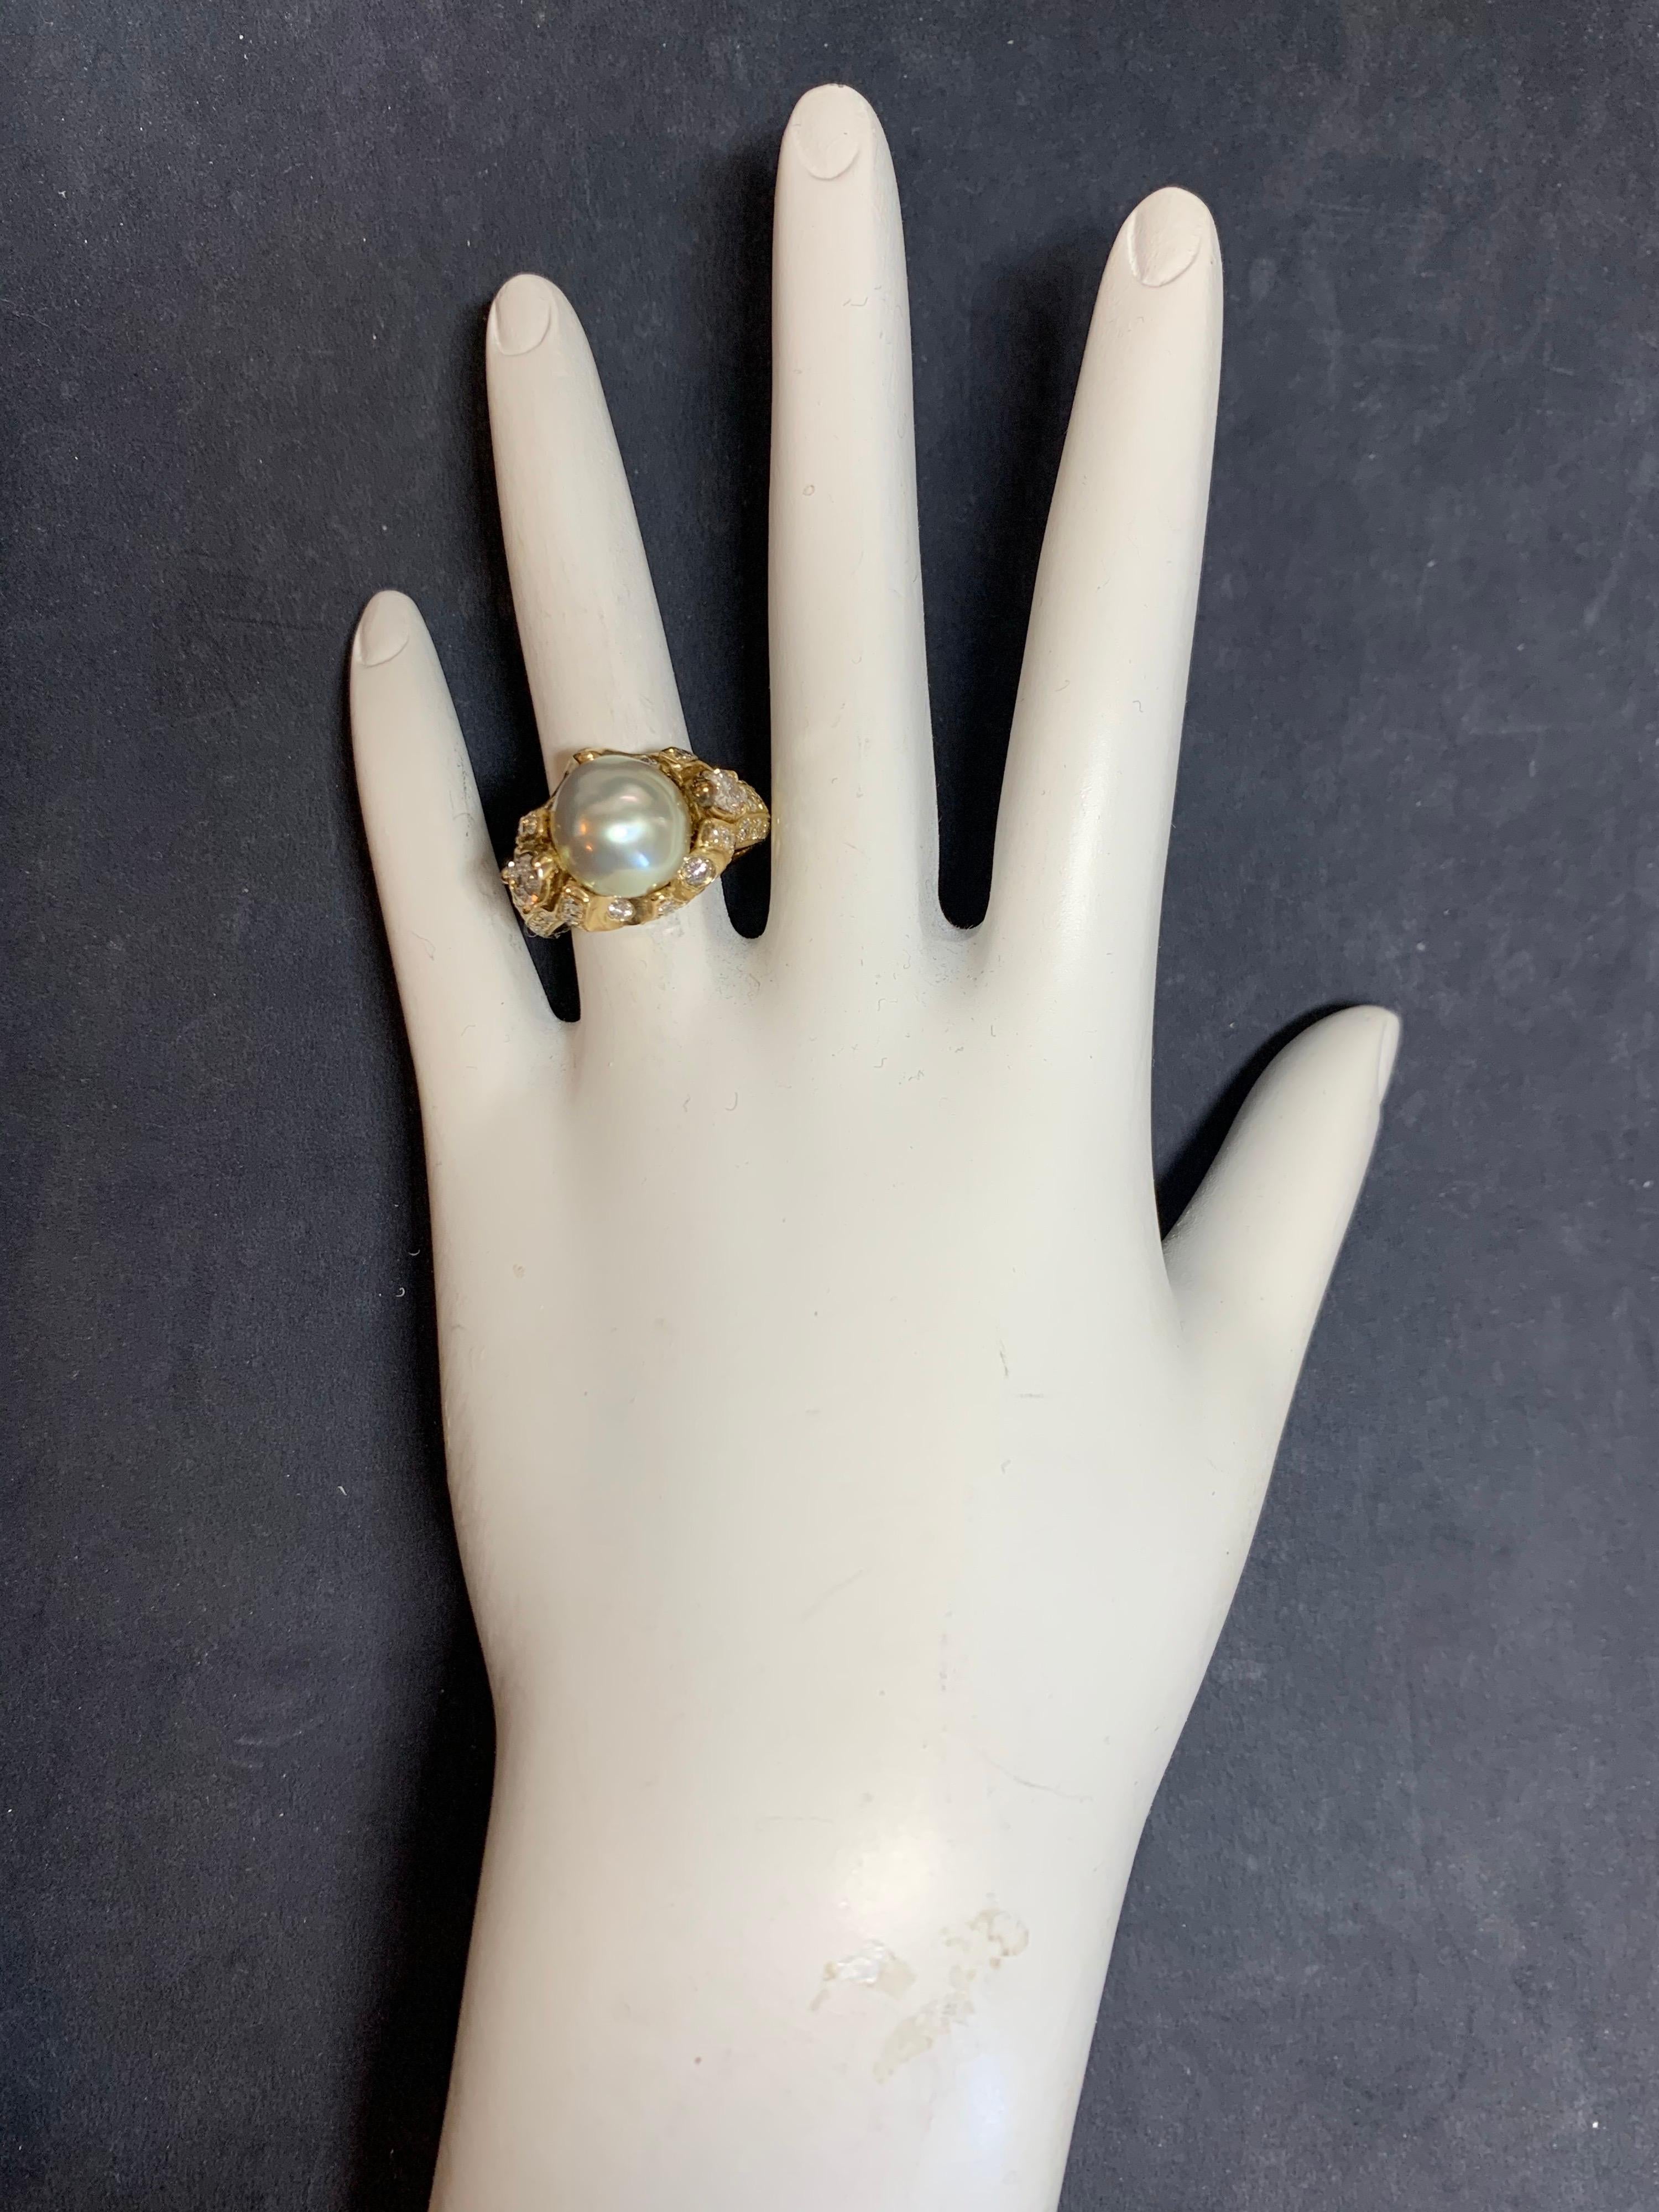 Retro 14k Yellow Gold 3 Carat Cocktail Ring set with Natural Diamonds & a 10.5mm Natural Pearl. 

The 66 natural round brilliant diamonds are approximately 2 carat, F-G color and VS clarity. 
The 2 natural pear shaped diamonds are approximately 1